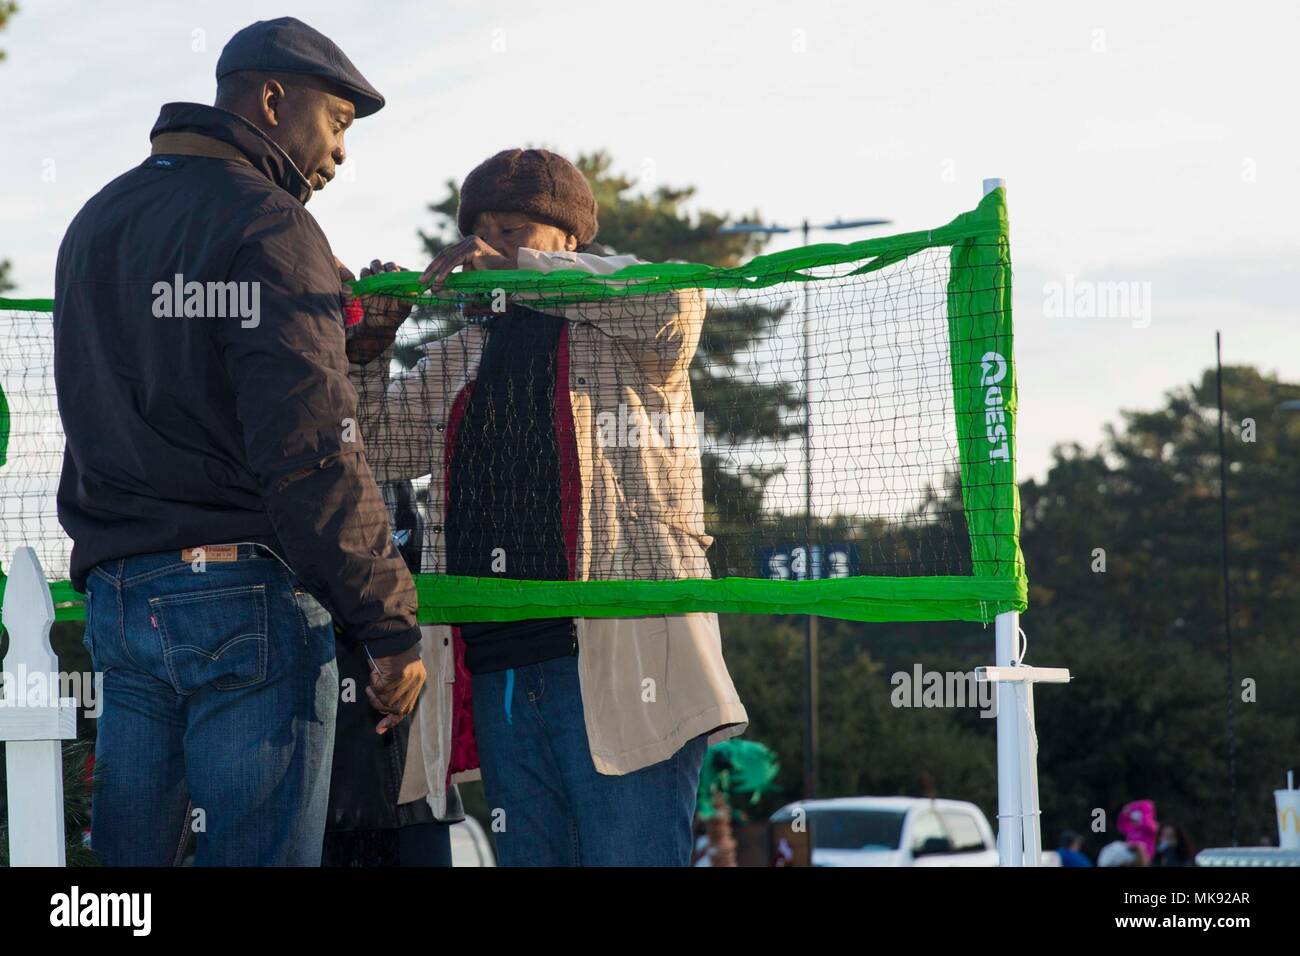 William C. Jones, left, pastor, and Claudie Anthony, right, church member of Marshall Chaperd Missionary Baptist Church prepare their float before the holiday parade in Jacksonville, N.C., Nov. 18, 2017. The 62nd Annual Jacksonville-Onslow Christmas Holiday Parade moved down Western Boulevard with 200 floats, patrons, and U.S. Marine leaders participating in the parade which began at Coastal Carolina Community College and ended at Brynn Marr Shopping Center. (U.S. Marine Corps photo by Pfc. Isaiah Gomez) Stock Photo